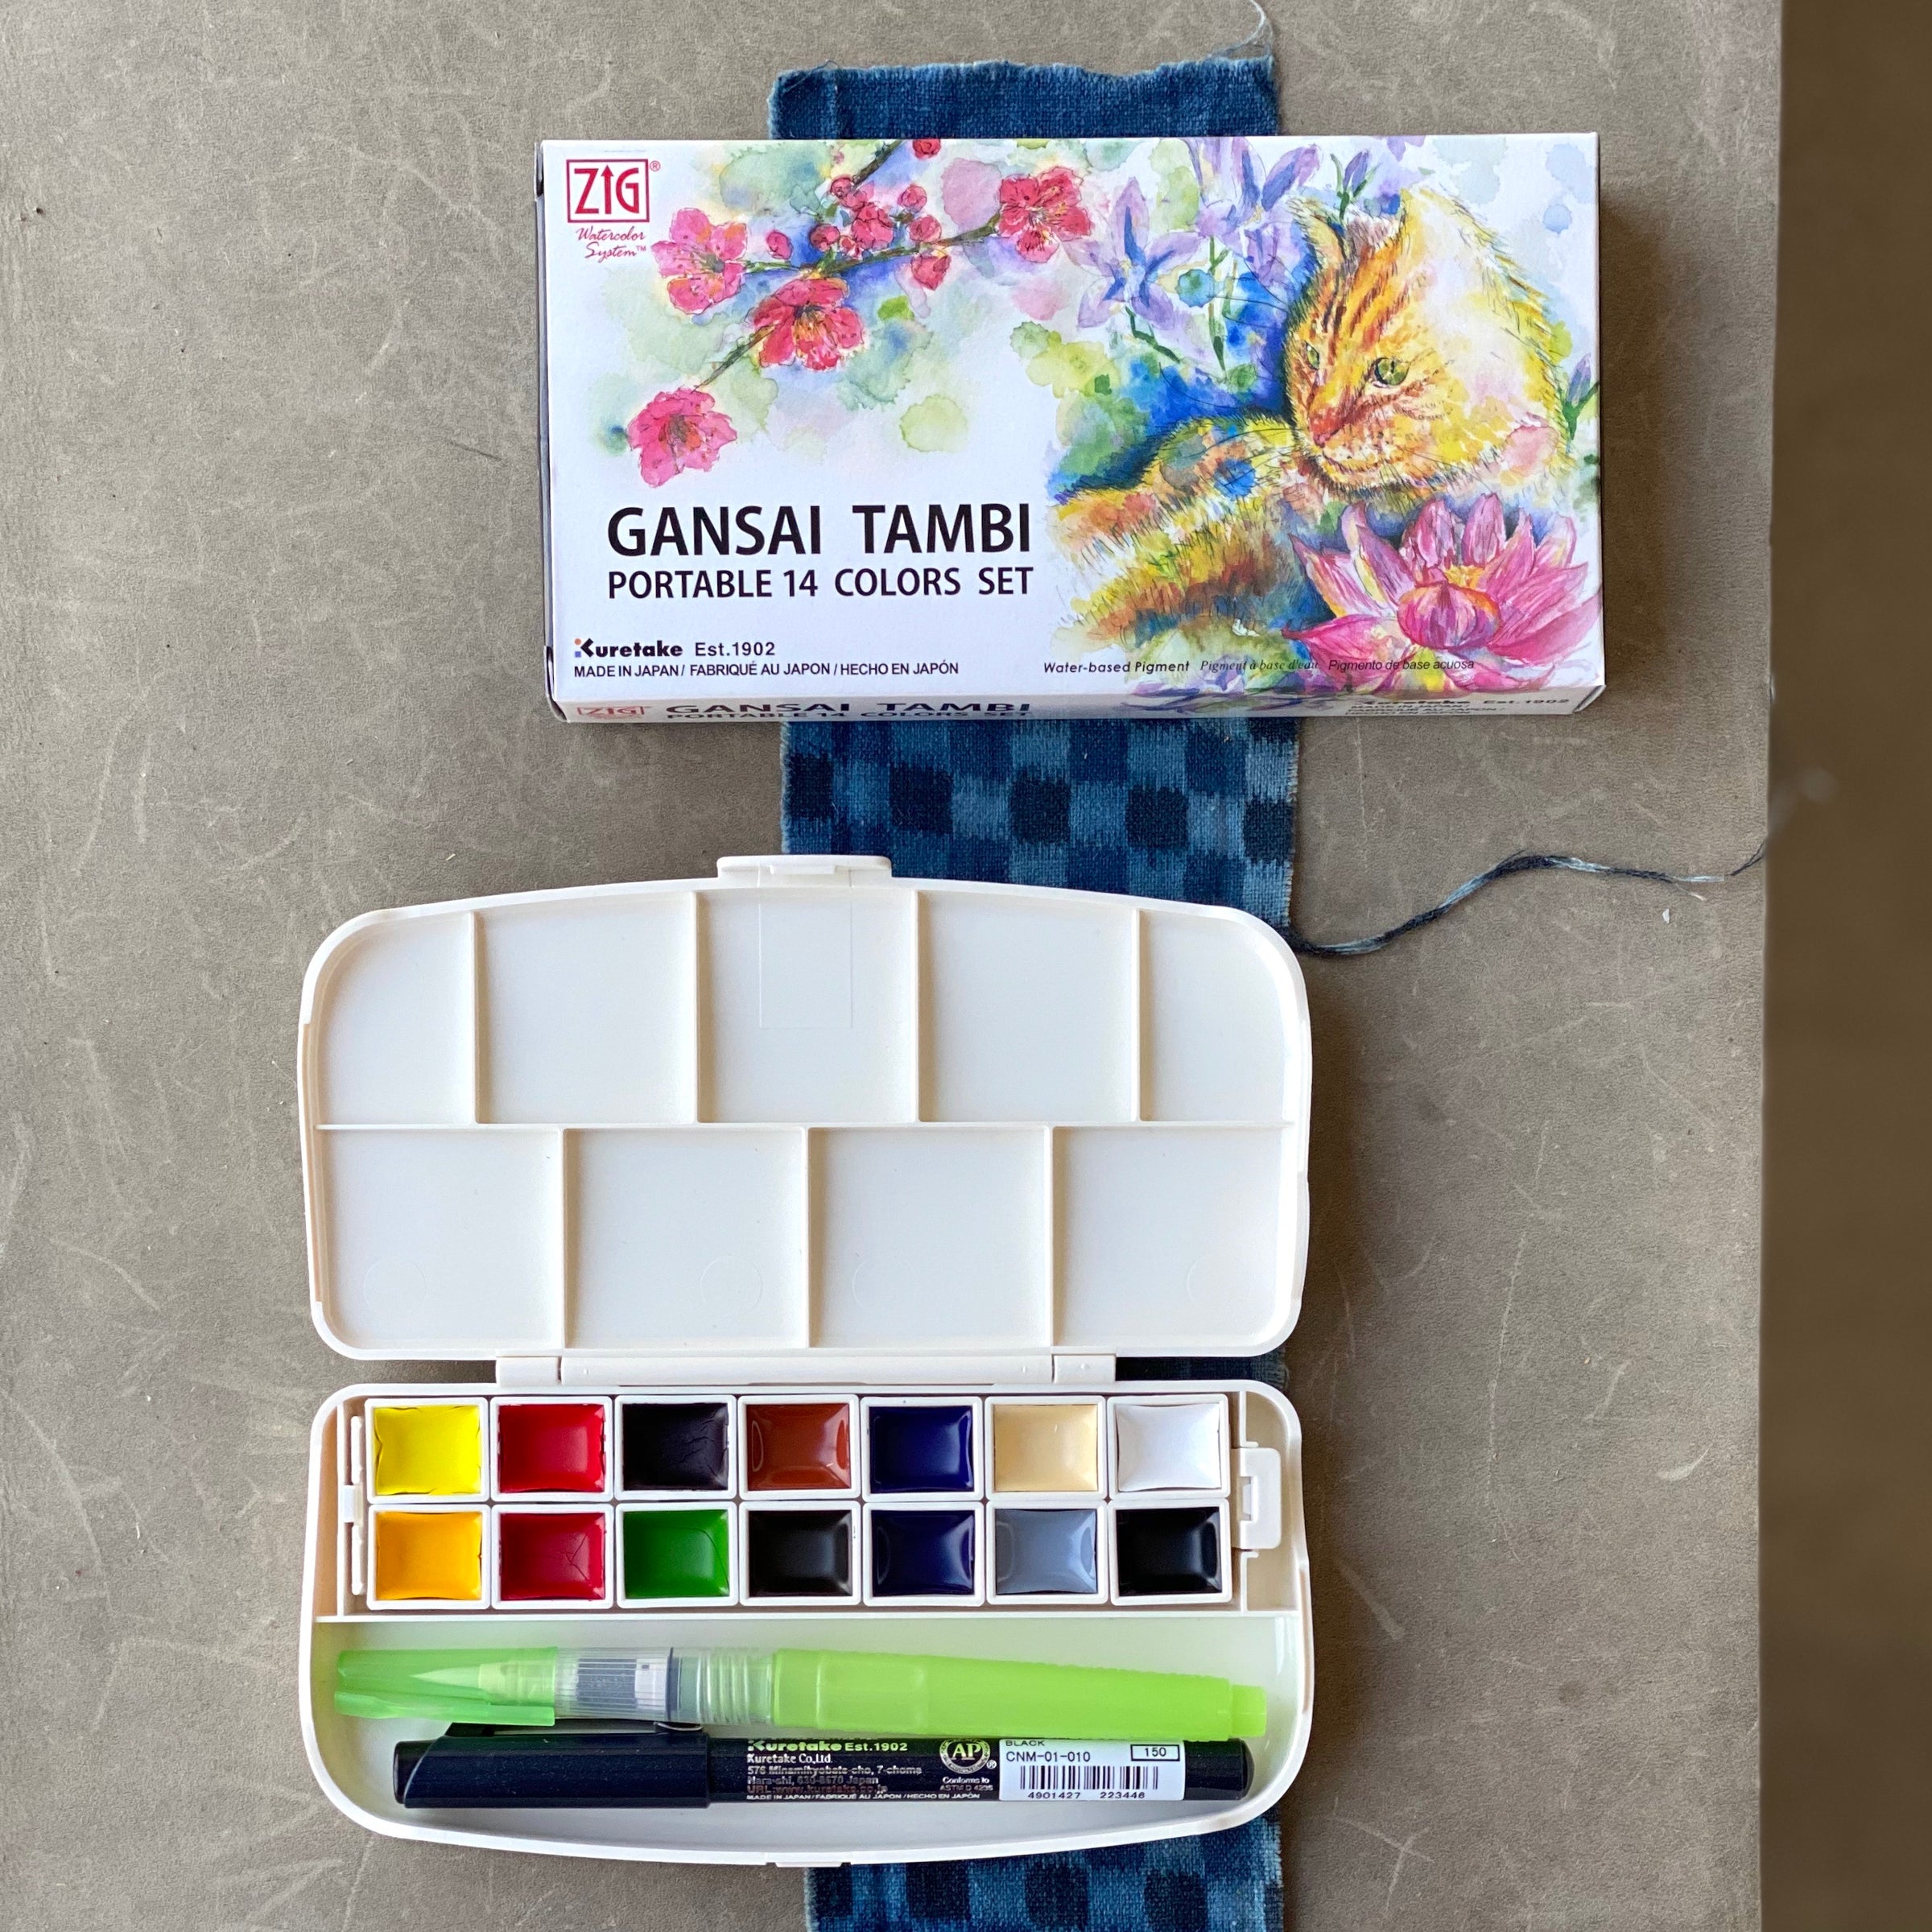 Kuretake GANSAI TAMBI, Portable 14 Colors Set, Watercolor Paint Set,  Professional-quality for artists and crafters, AP-Certified, water colors  for